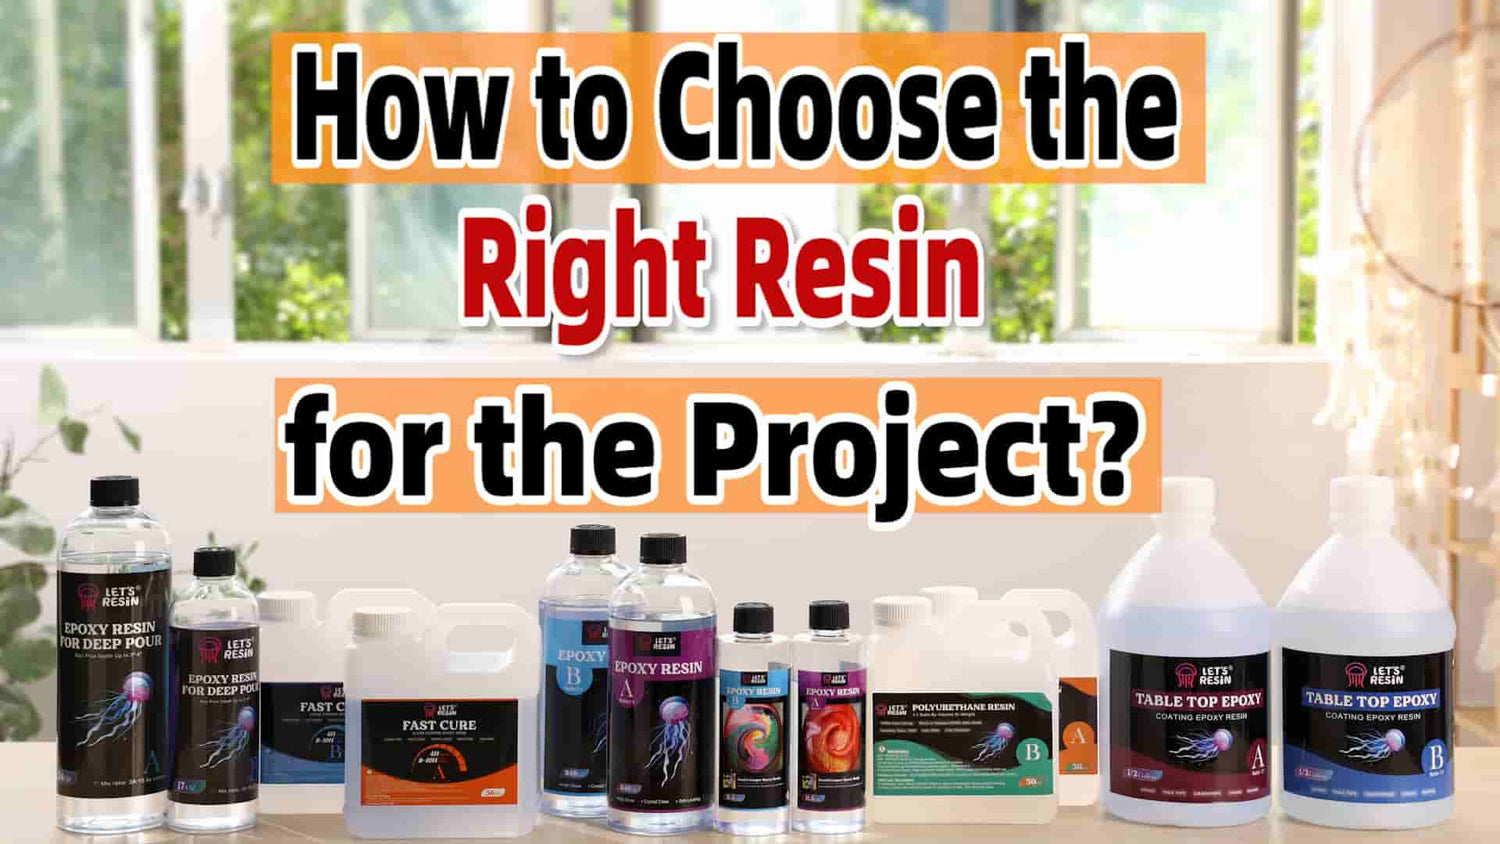 How to Choose the Right Resin for the Project